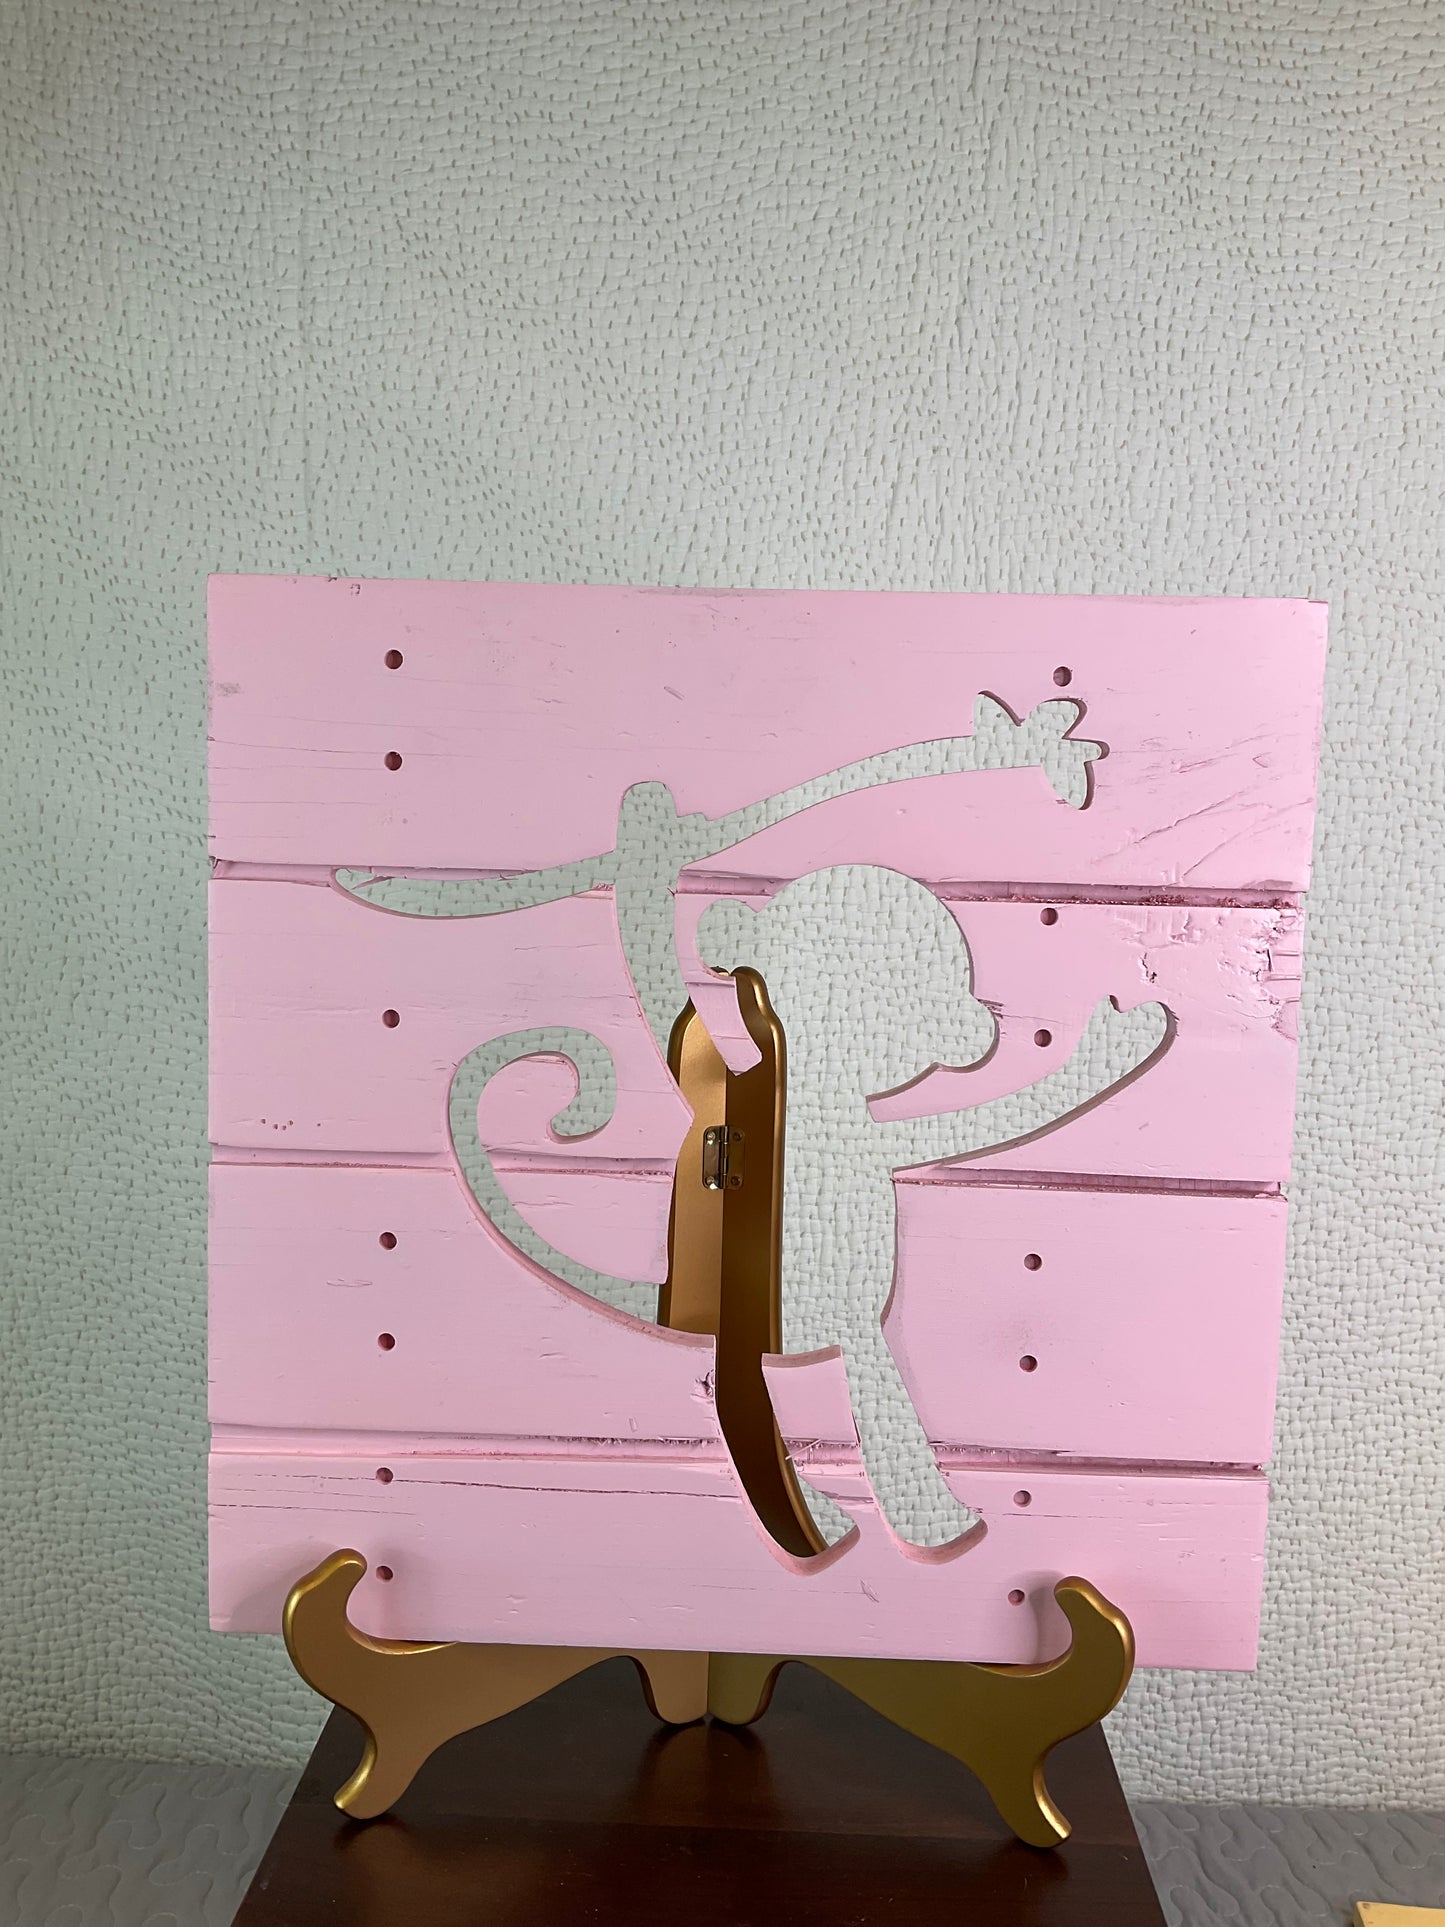 CLEARANCE Baby Nursery Room Decor, Sold Separately